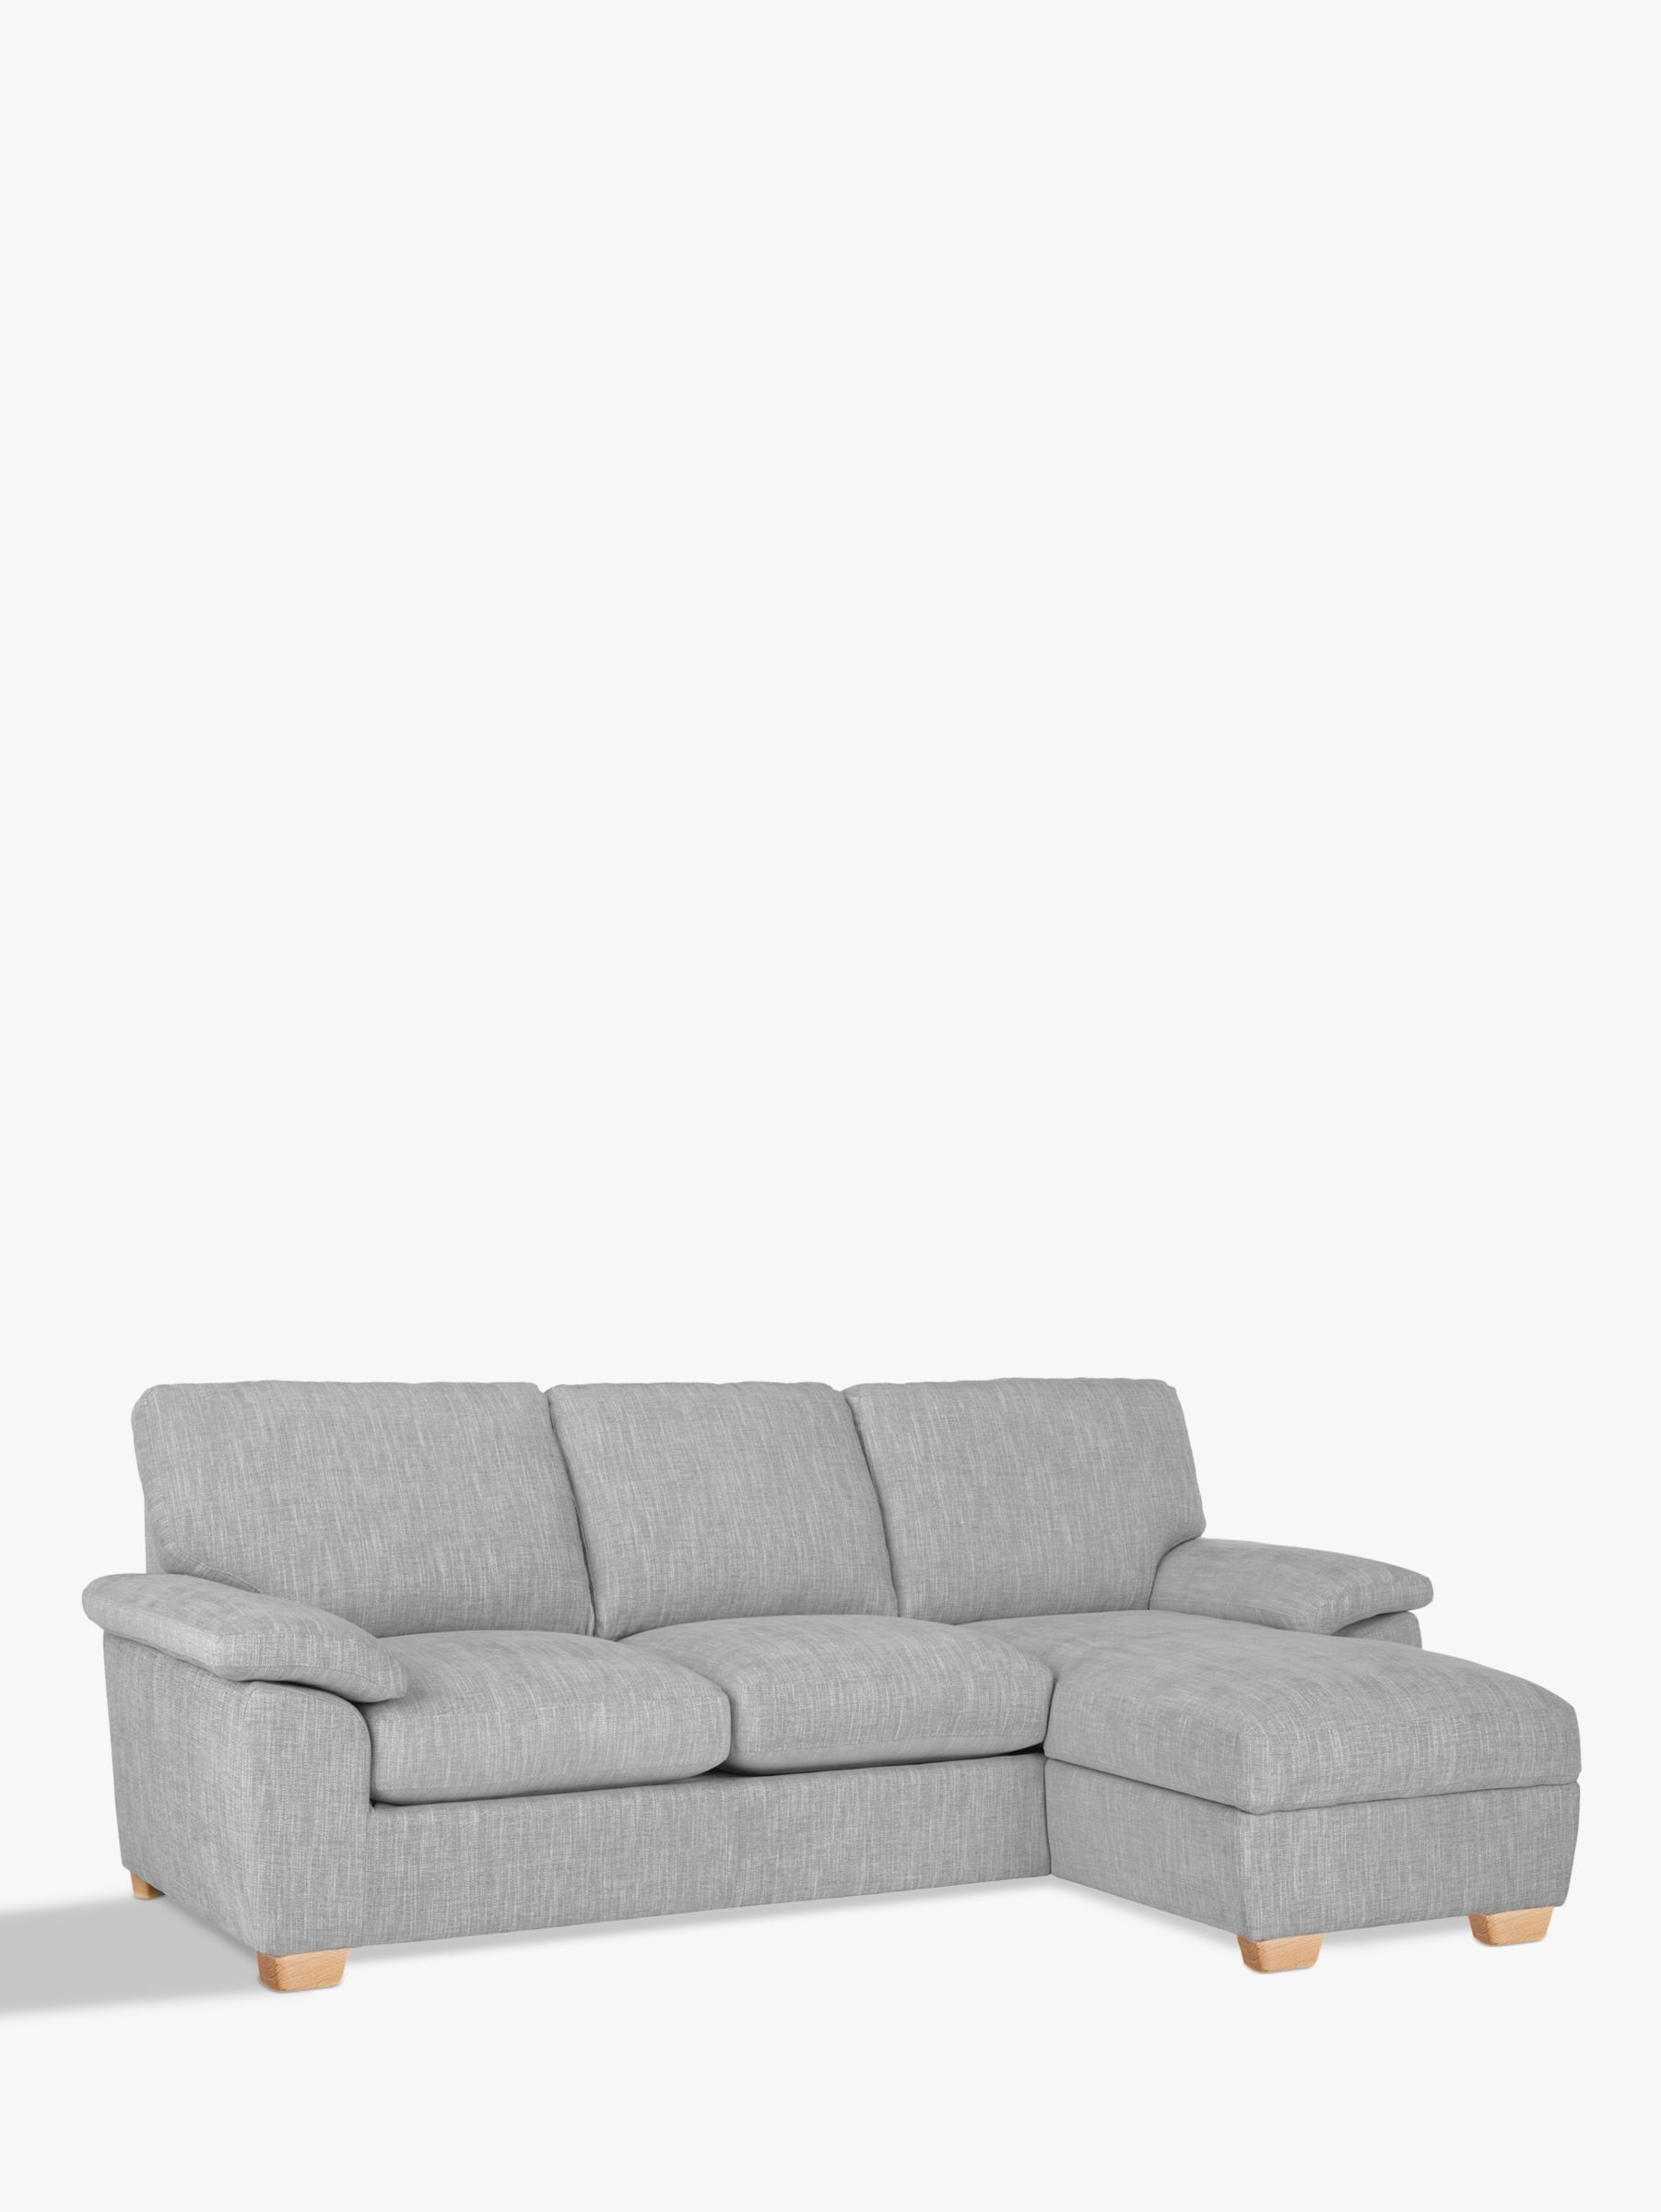 Photo of John lewis camden 5+ seater rhf storage chaise end sofa bed